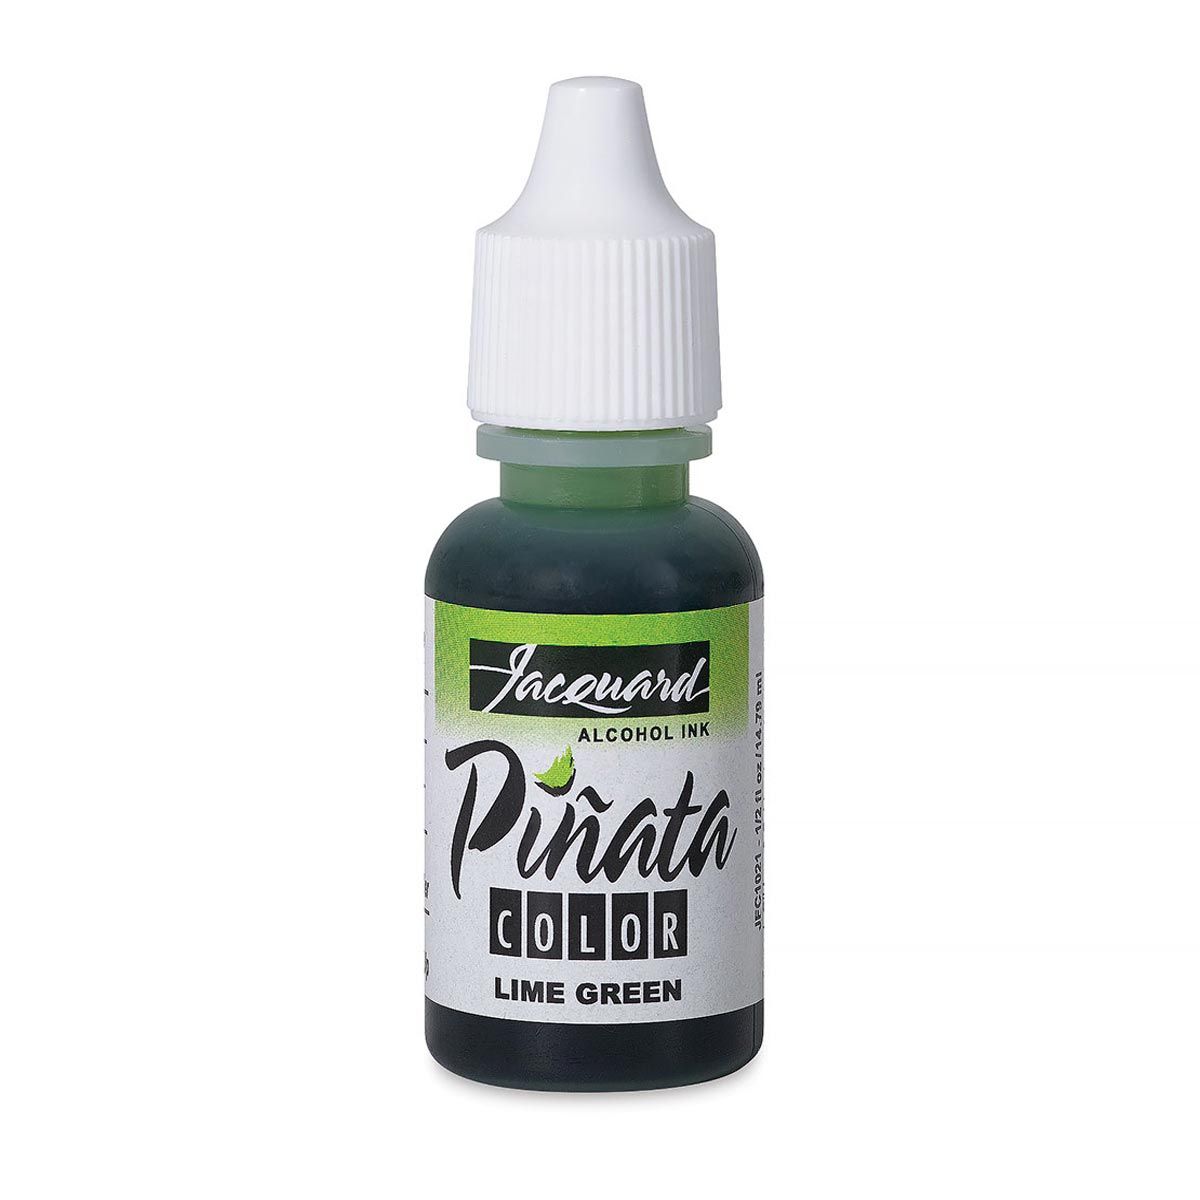 Pinata Color Alcohol Ink Lime Green .5 oz